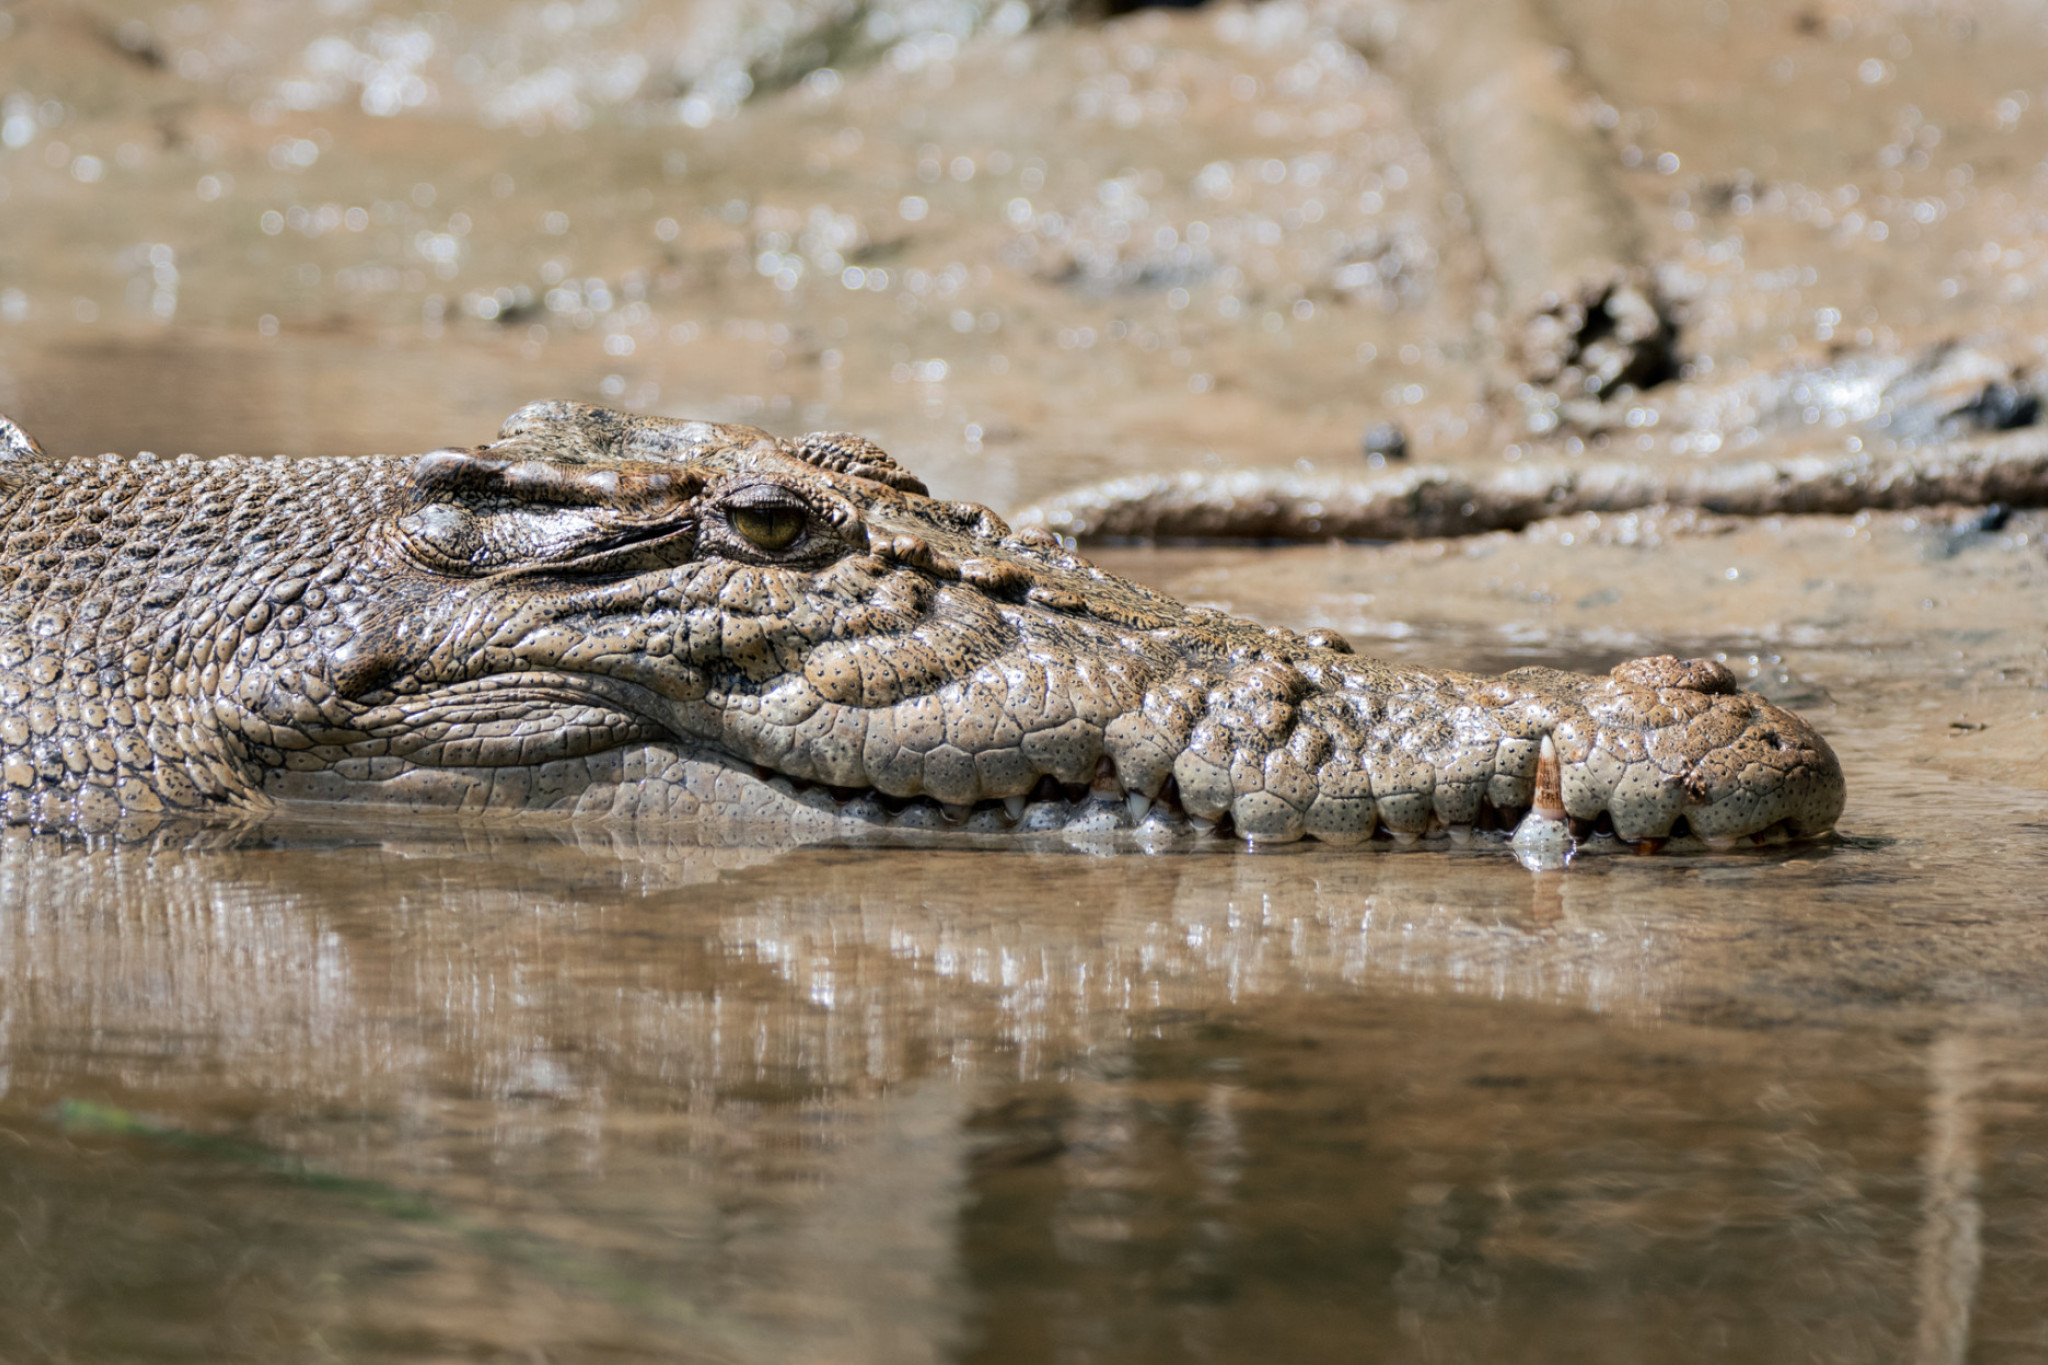 Officials deny croc sightings - feature photo